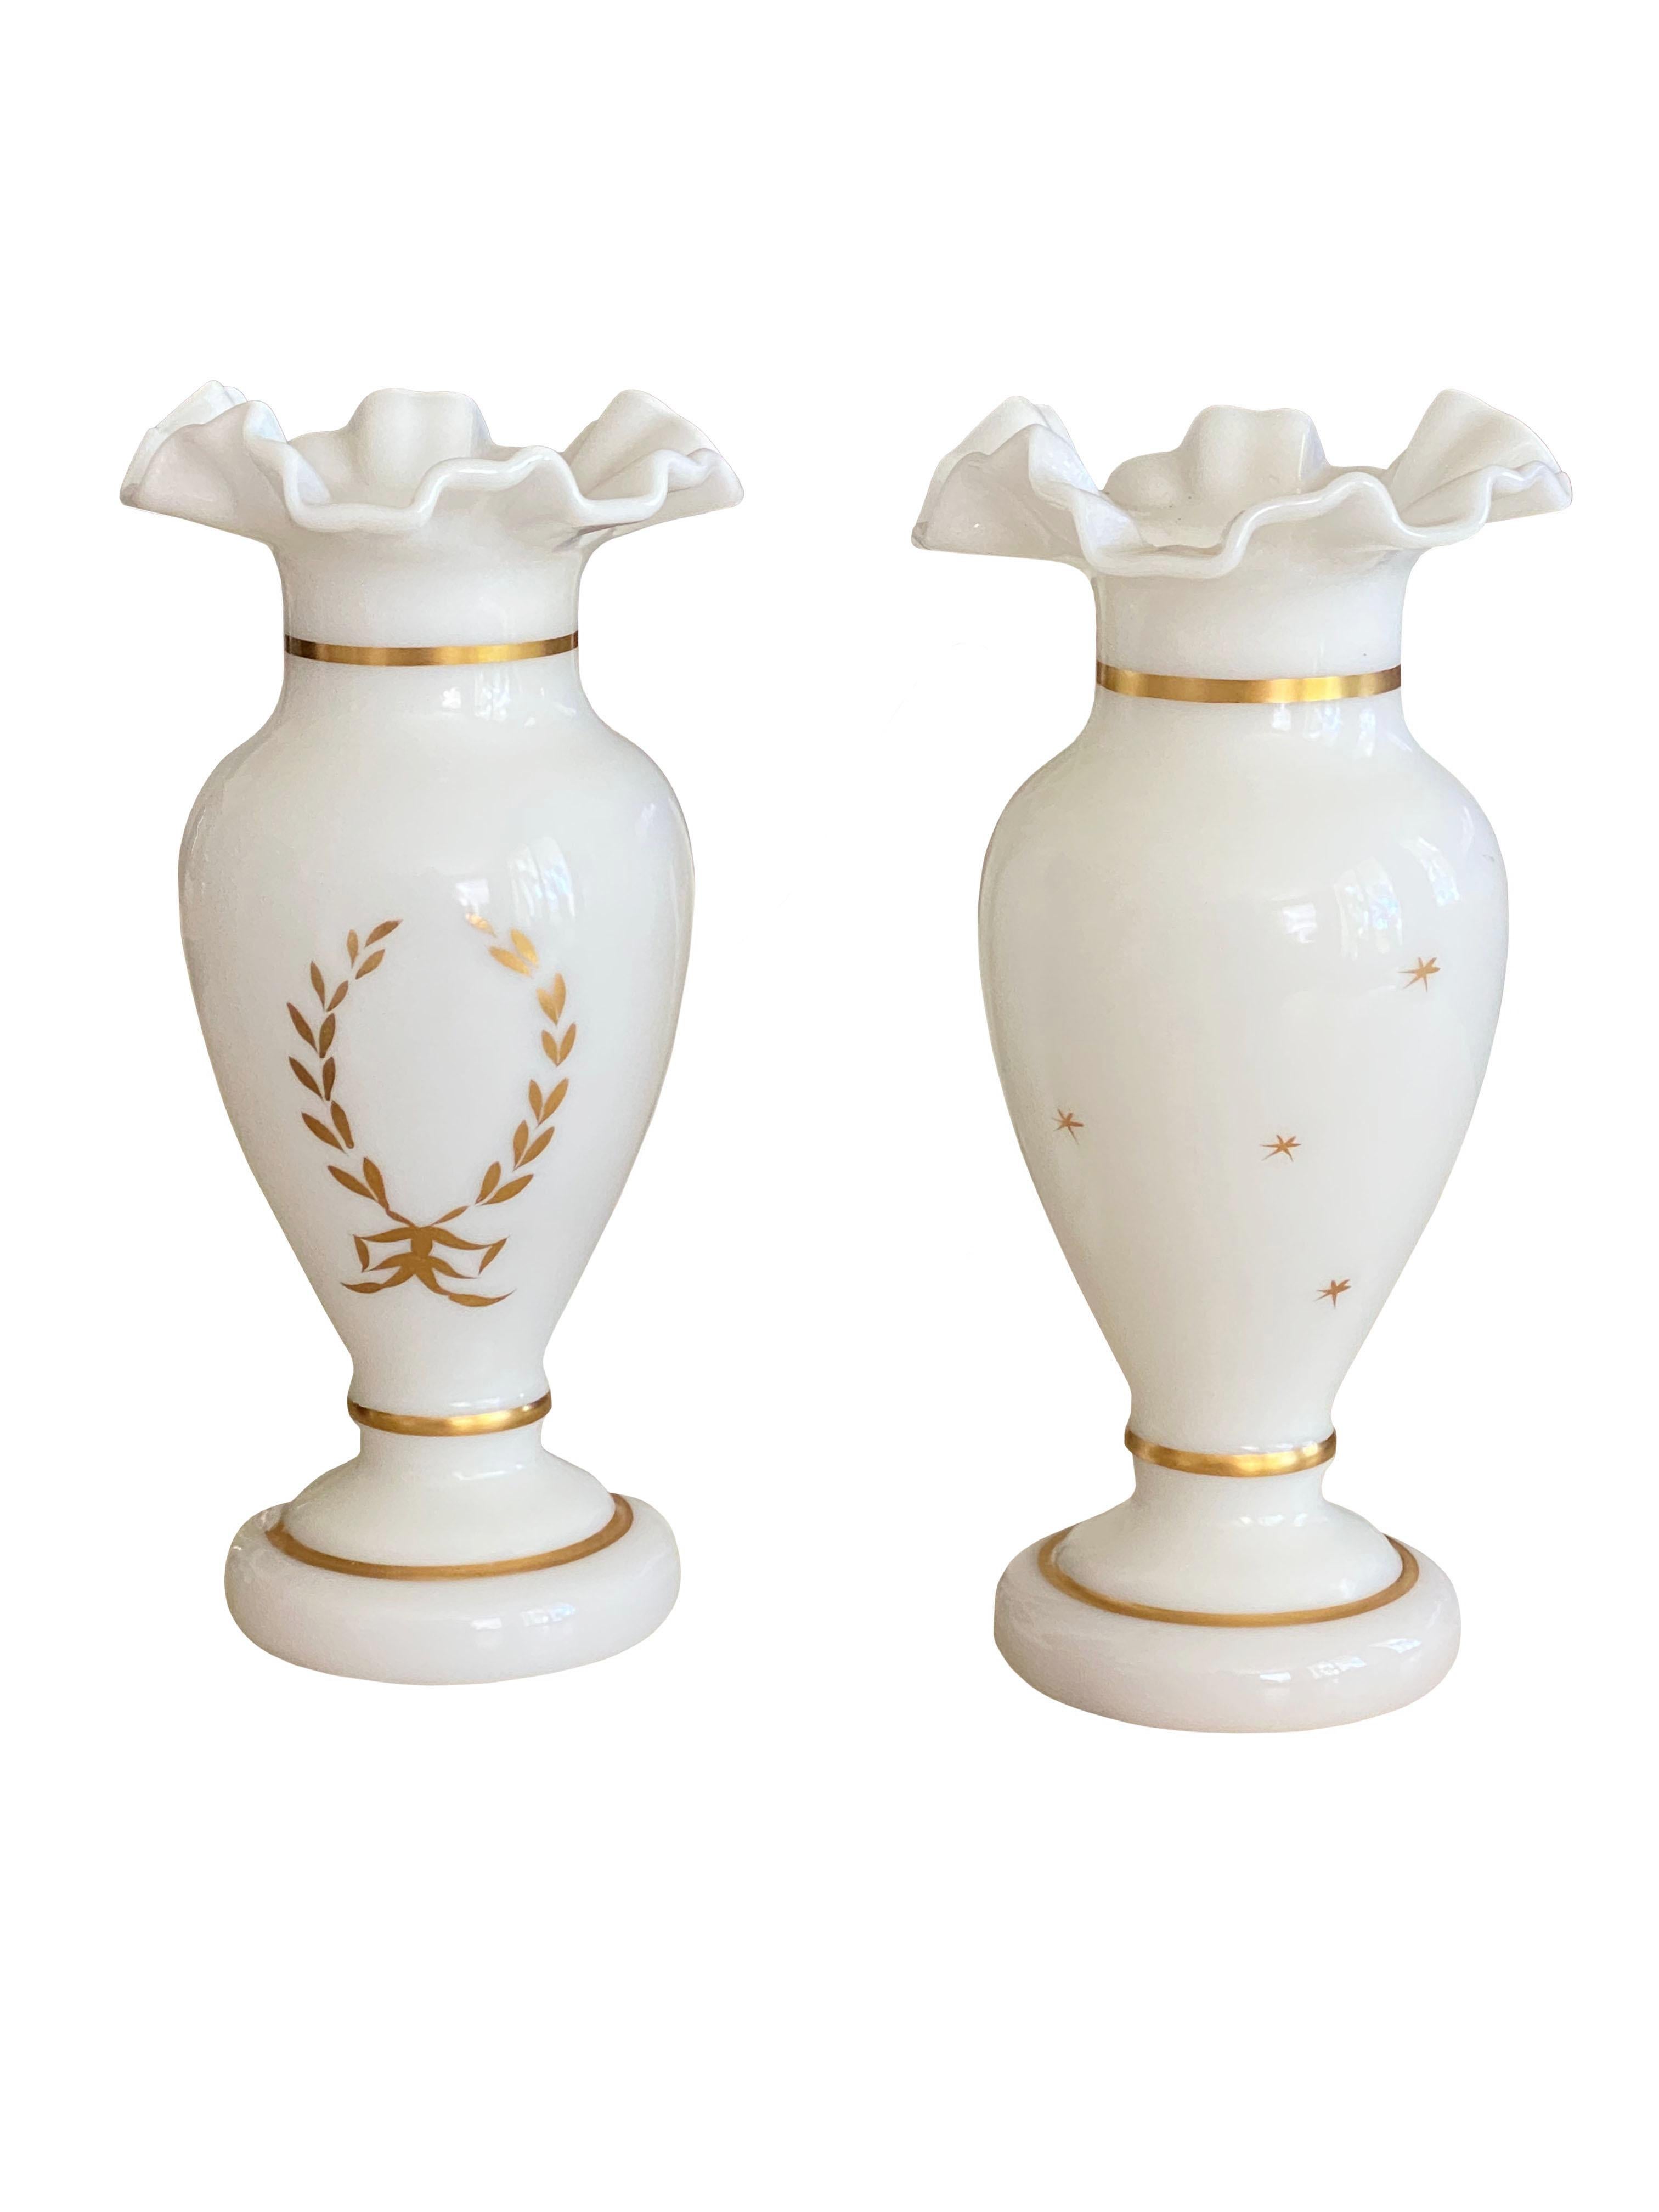 A very pretty pair of antique white opaline vases with a ruffled rim. Hand painted gilt trim and laurel wreath with bow on front and scattered stars on back.